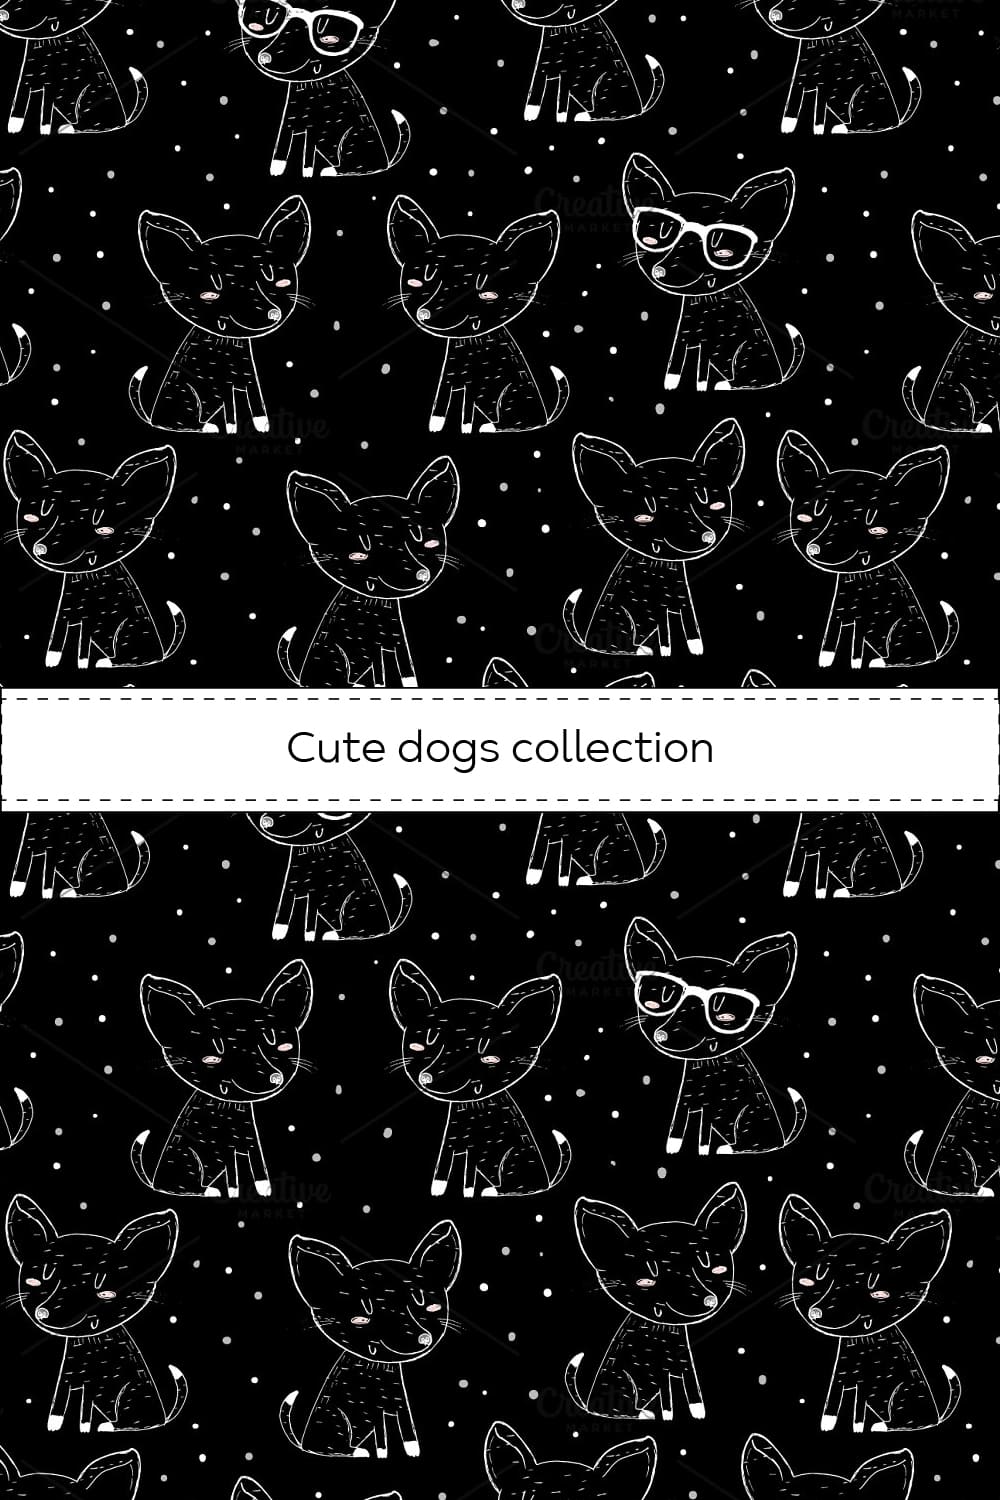 Cute dogs collection!.